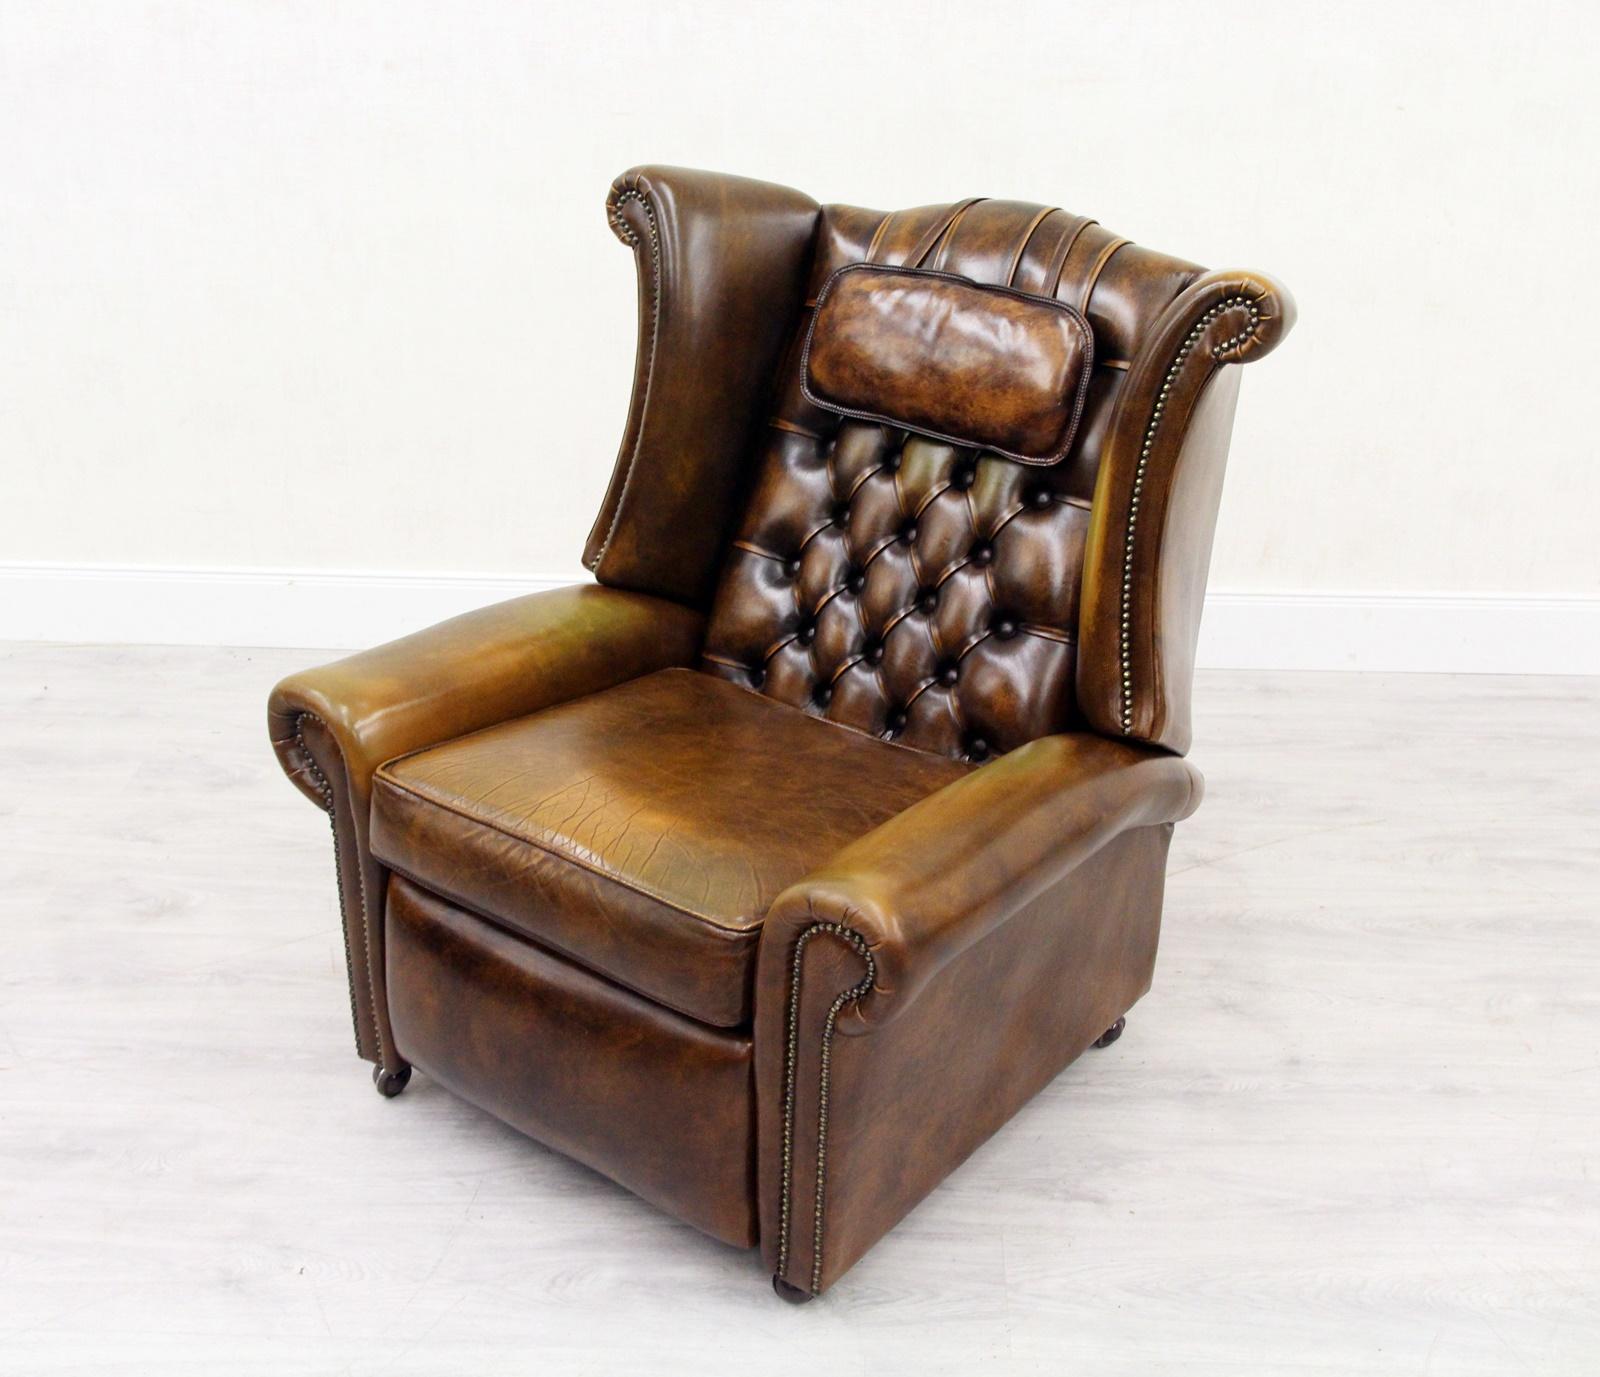 Chesterfield TV armchair
The shape is especially beautiful
Measures: Armchair:
Height x 98 cm width x 90 cm depth x 90cm
Condition: The armchair is in good condition for the age and still has the charm of the 